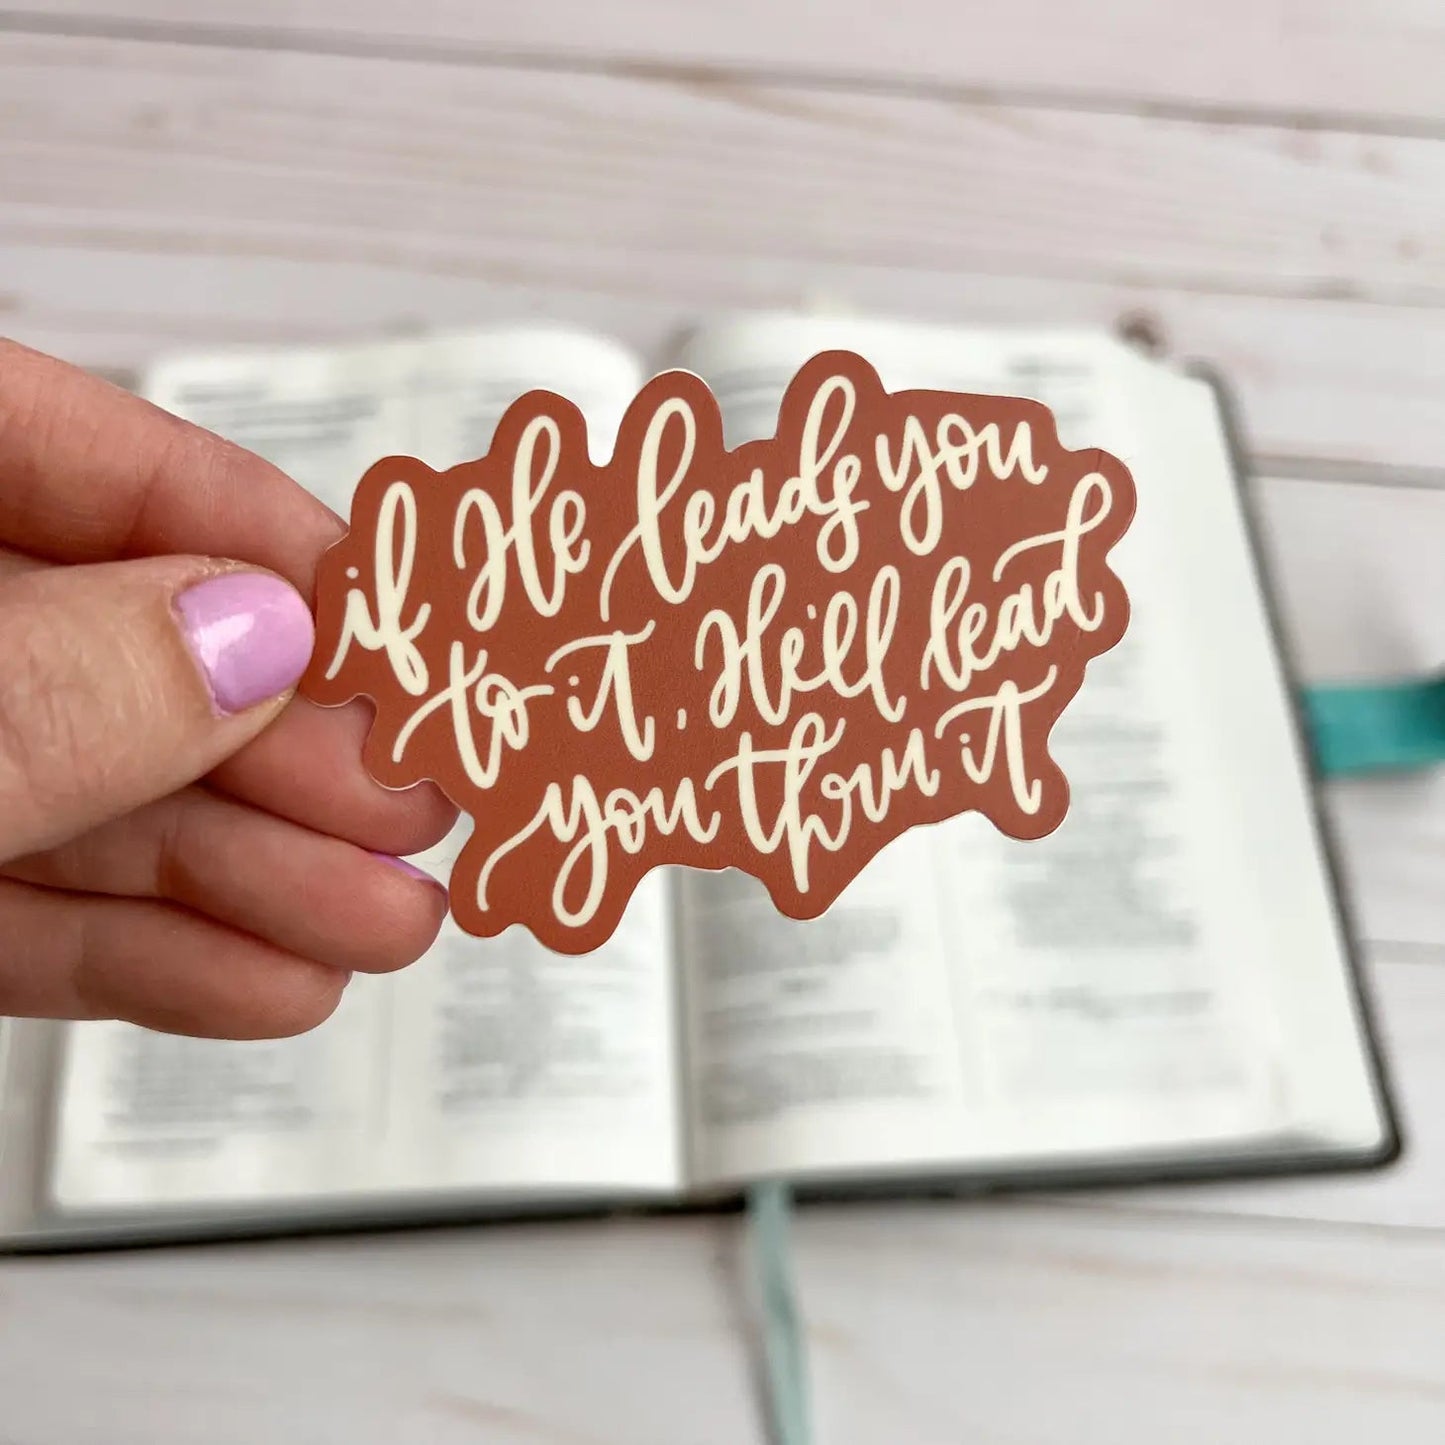 if He leads you to it, He'll lead you through it Sticker - Global Hues Market